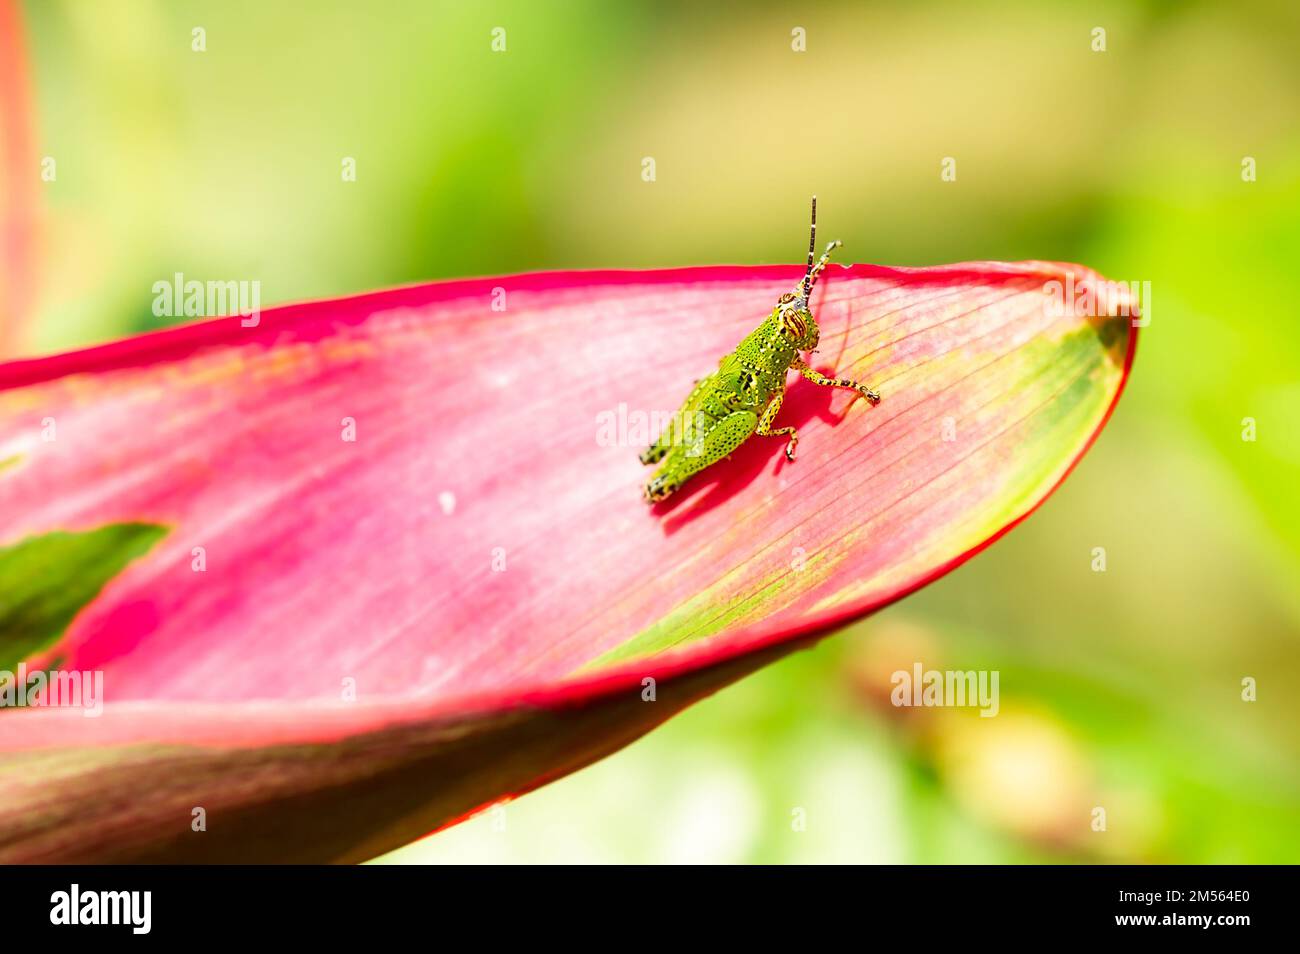 A Rufous grasshopper resting on a leaf in Malaysia Stock Photo